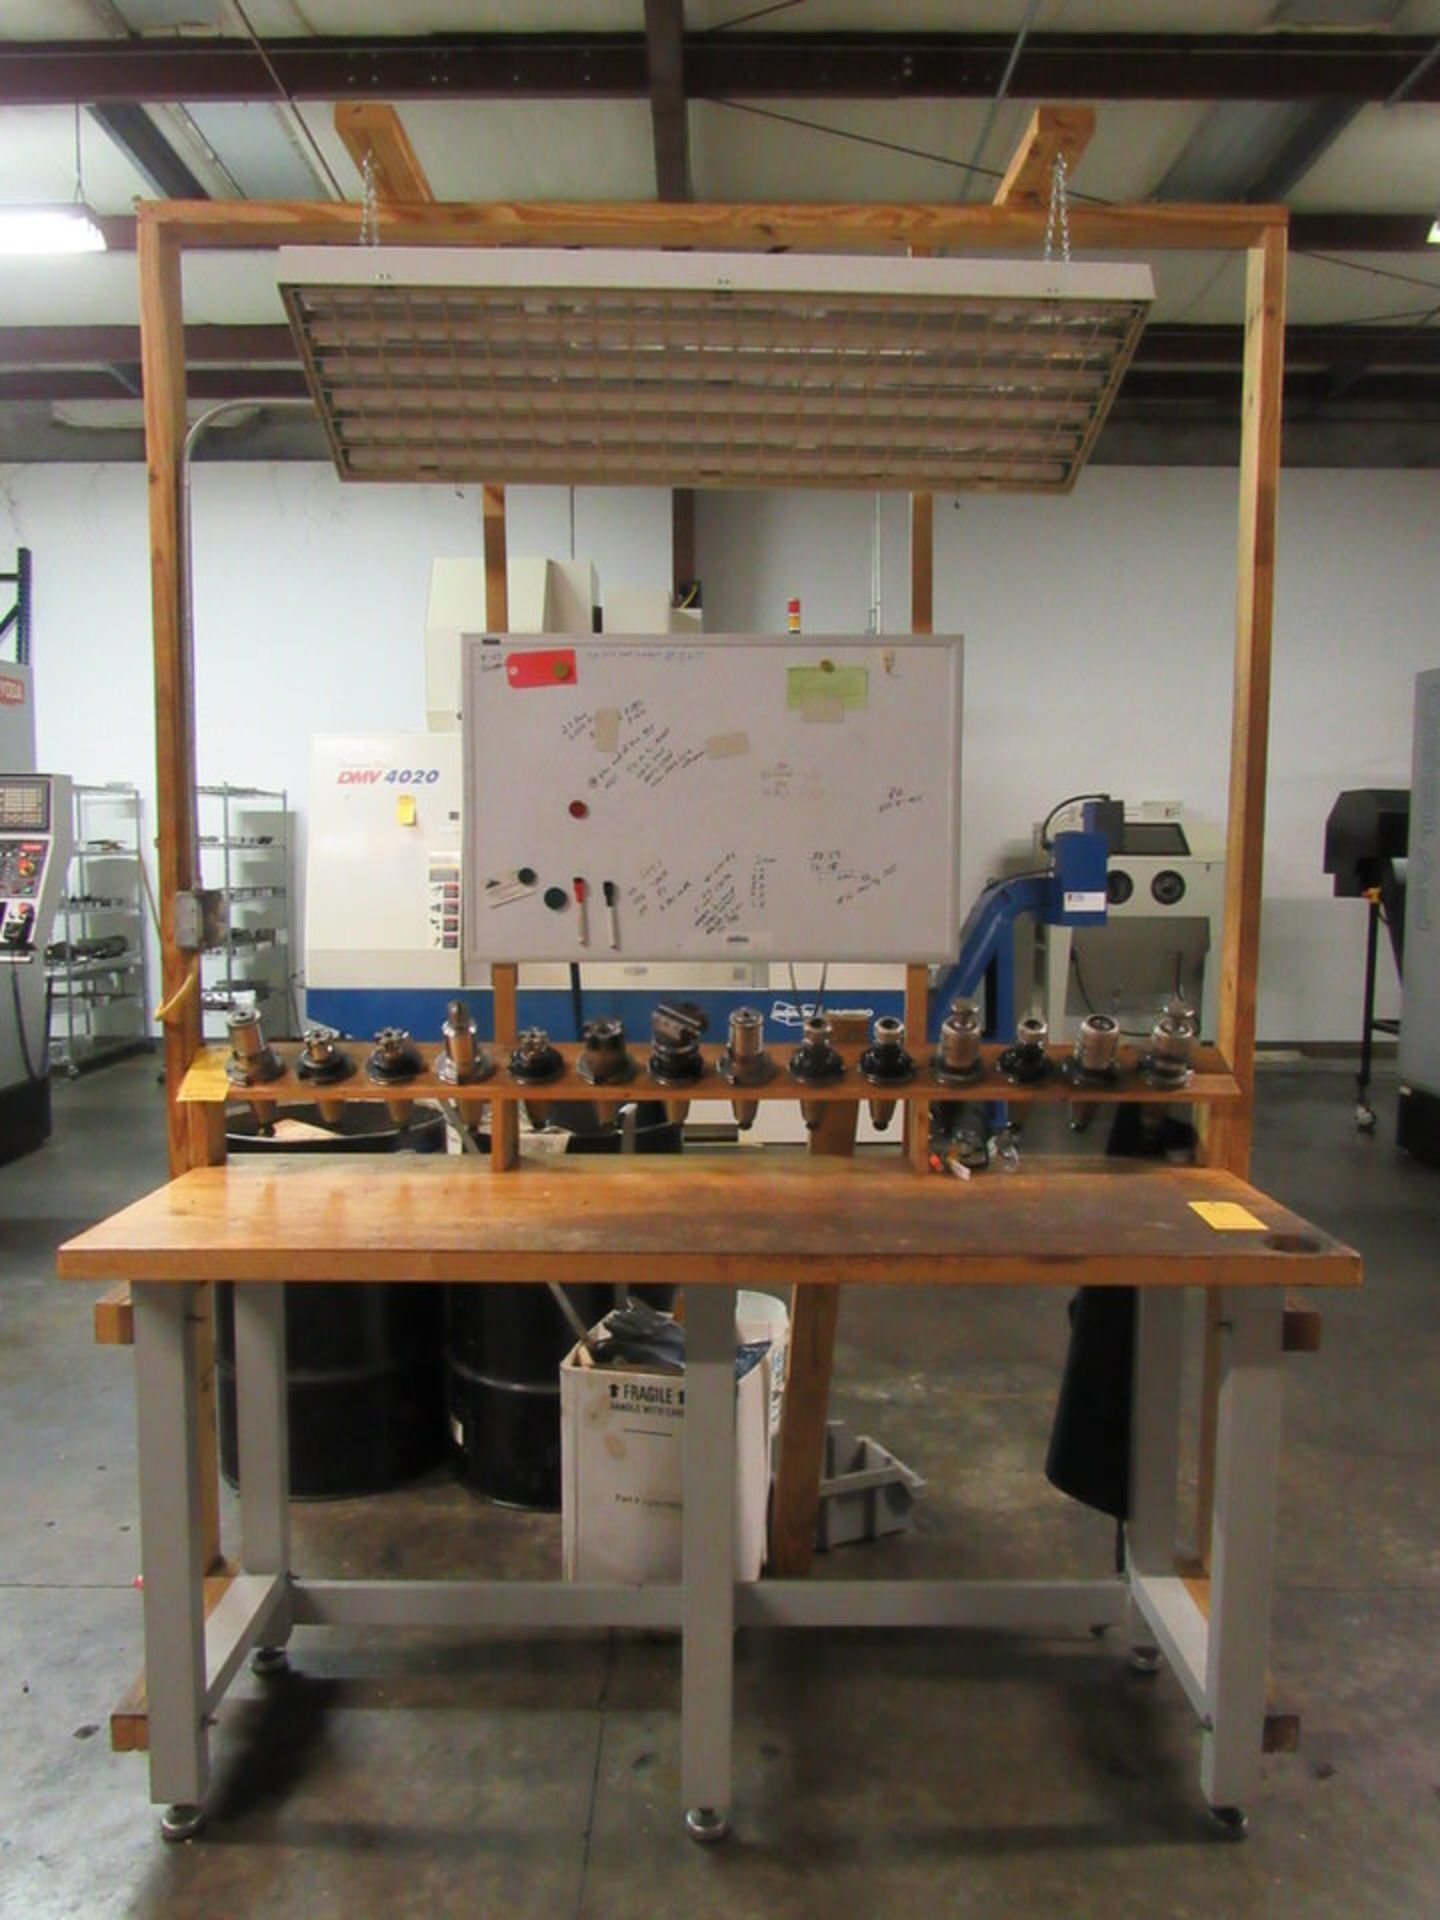 Machinist's Work Station, 25" x 72" x 38-1/2" high wooden table, 14 tool holding stations, white